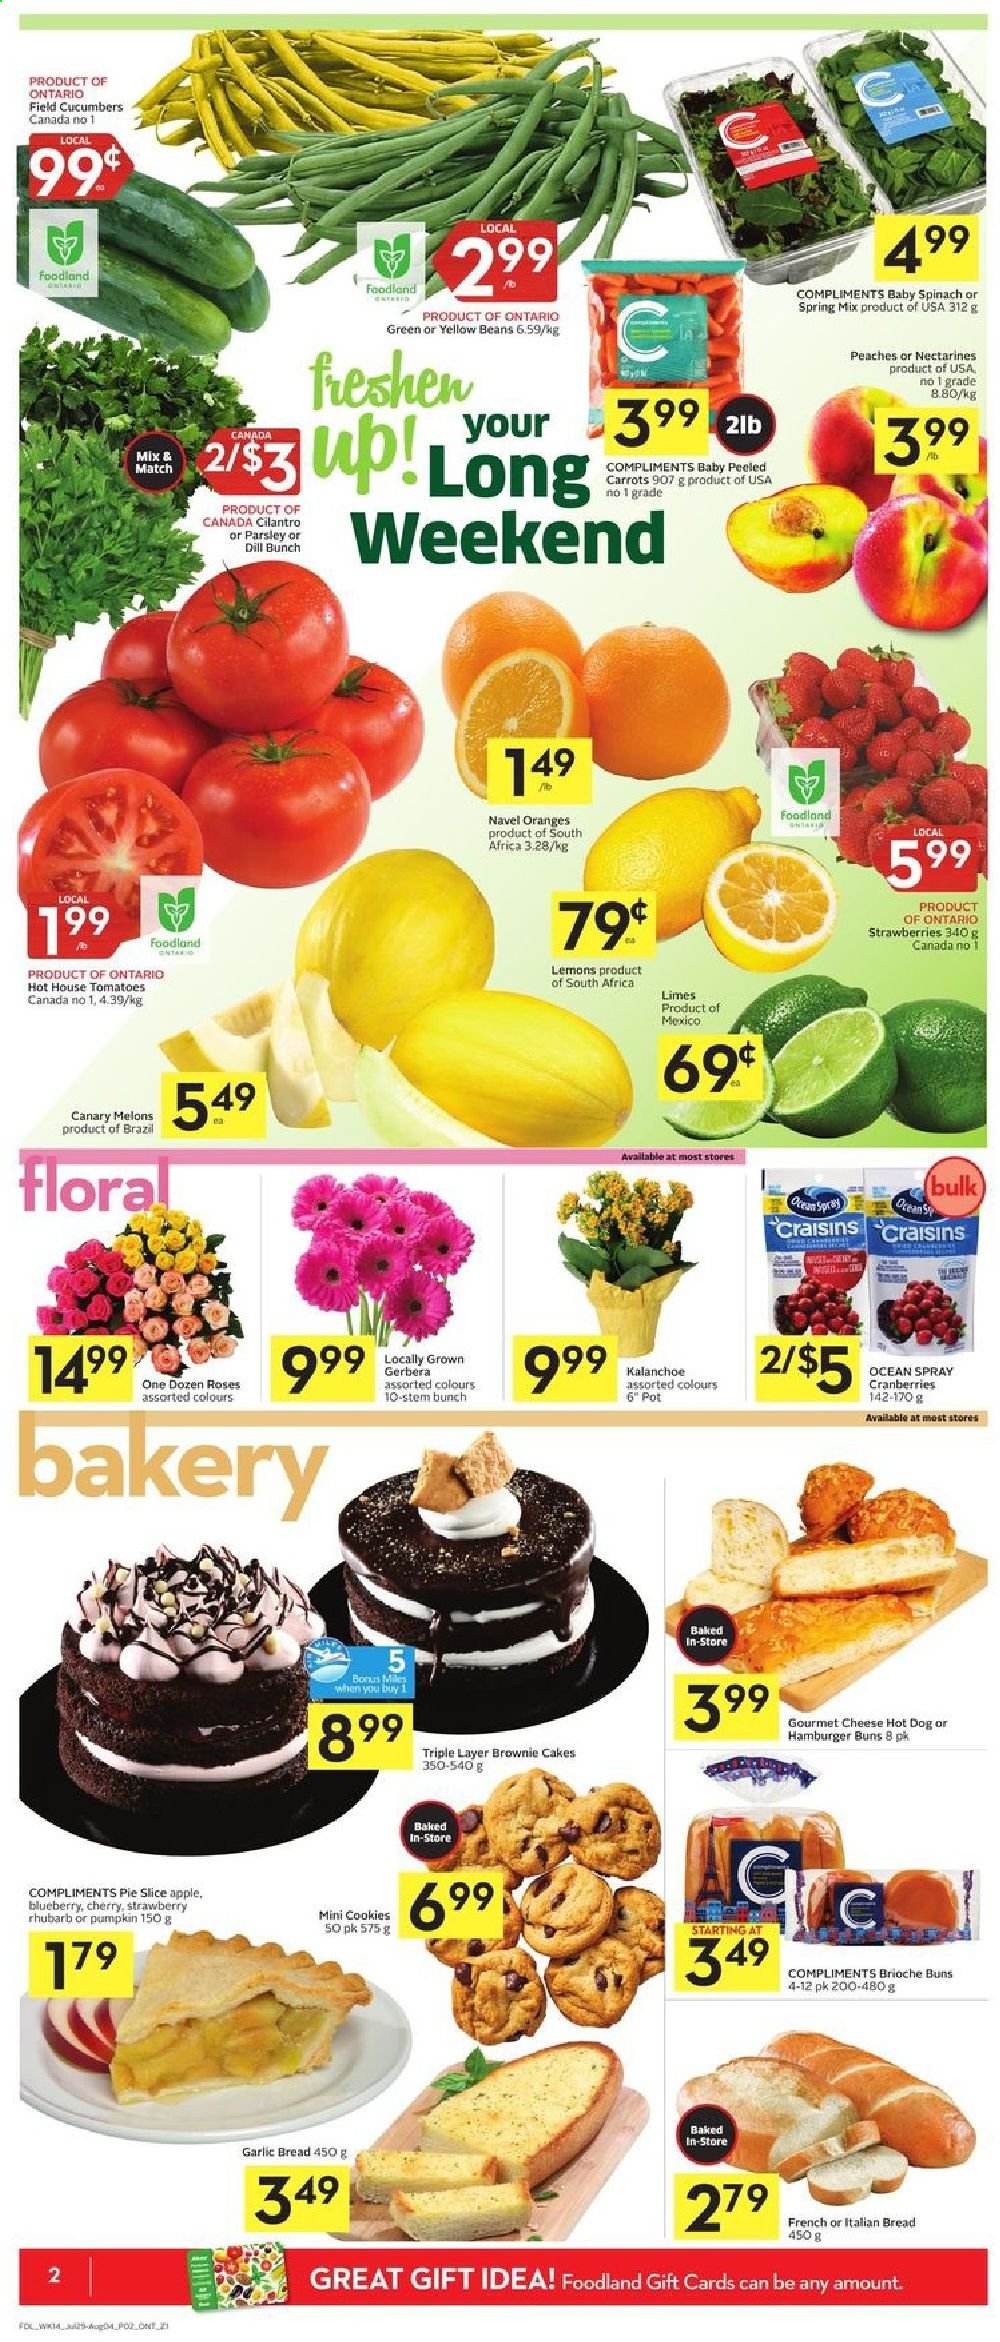 thumbnail - Foodland Flyer - July 29, 2021 - August 04, 2021 - Sales products - bread, cake, pie, buns, burger buns, brioche, brownies, beans, carrots, cucumber, rhubarb, pumpkin, parsley, limes, nectarines, strawberries, melons, lemons, peaches, navel oranges, hot dog, cheese, Flora, cookies, craisins, cranberries, cilantro, dill, dried fruit. Page 2.